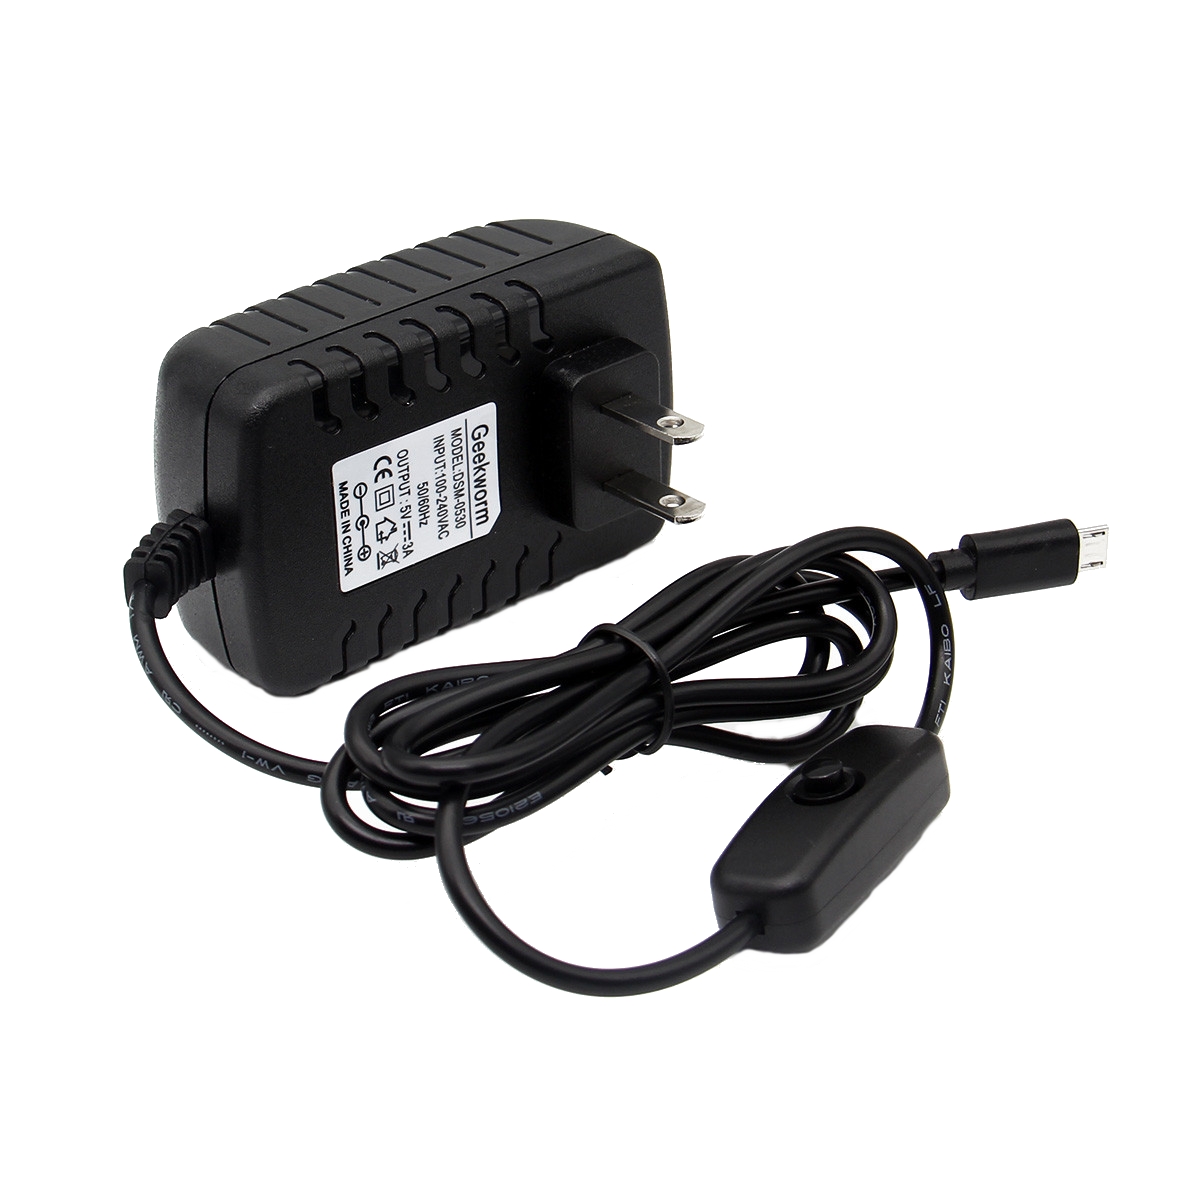 

Geekworm US Standard DC 5V 3.0A Power Supply Adapter with Switch For Raspberry Pi